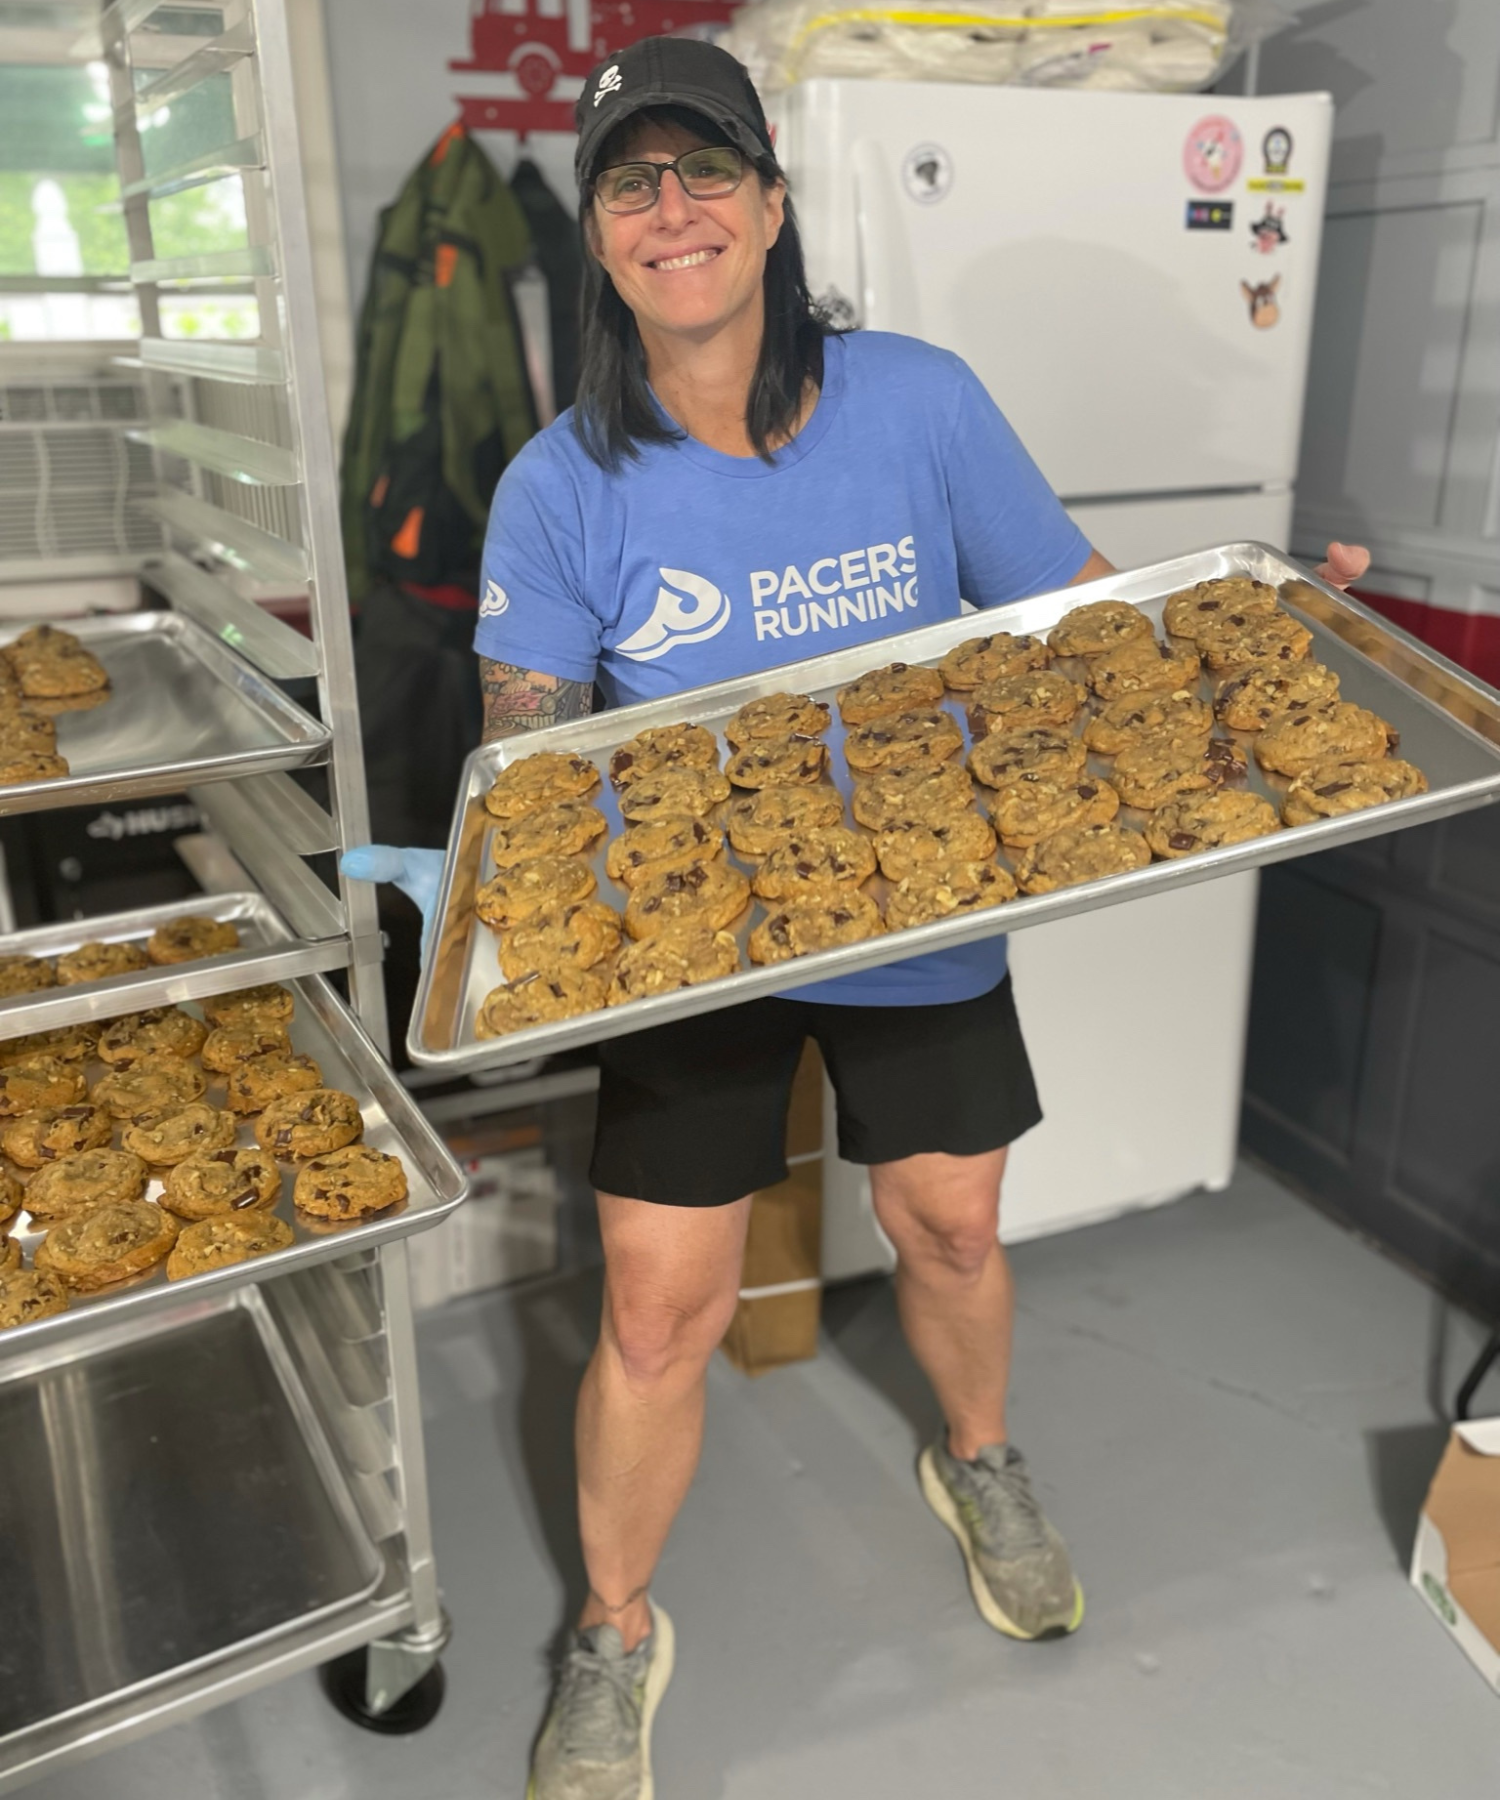 Lisa holding a tray of Scuttlebutt Bakery cookies.